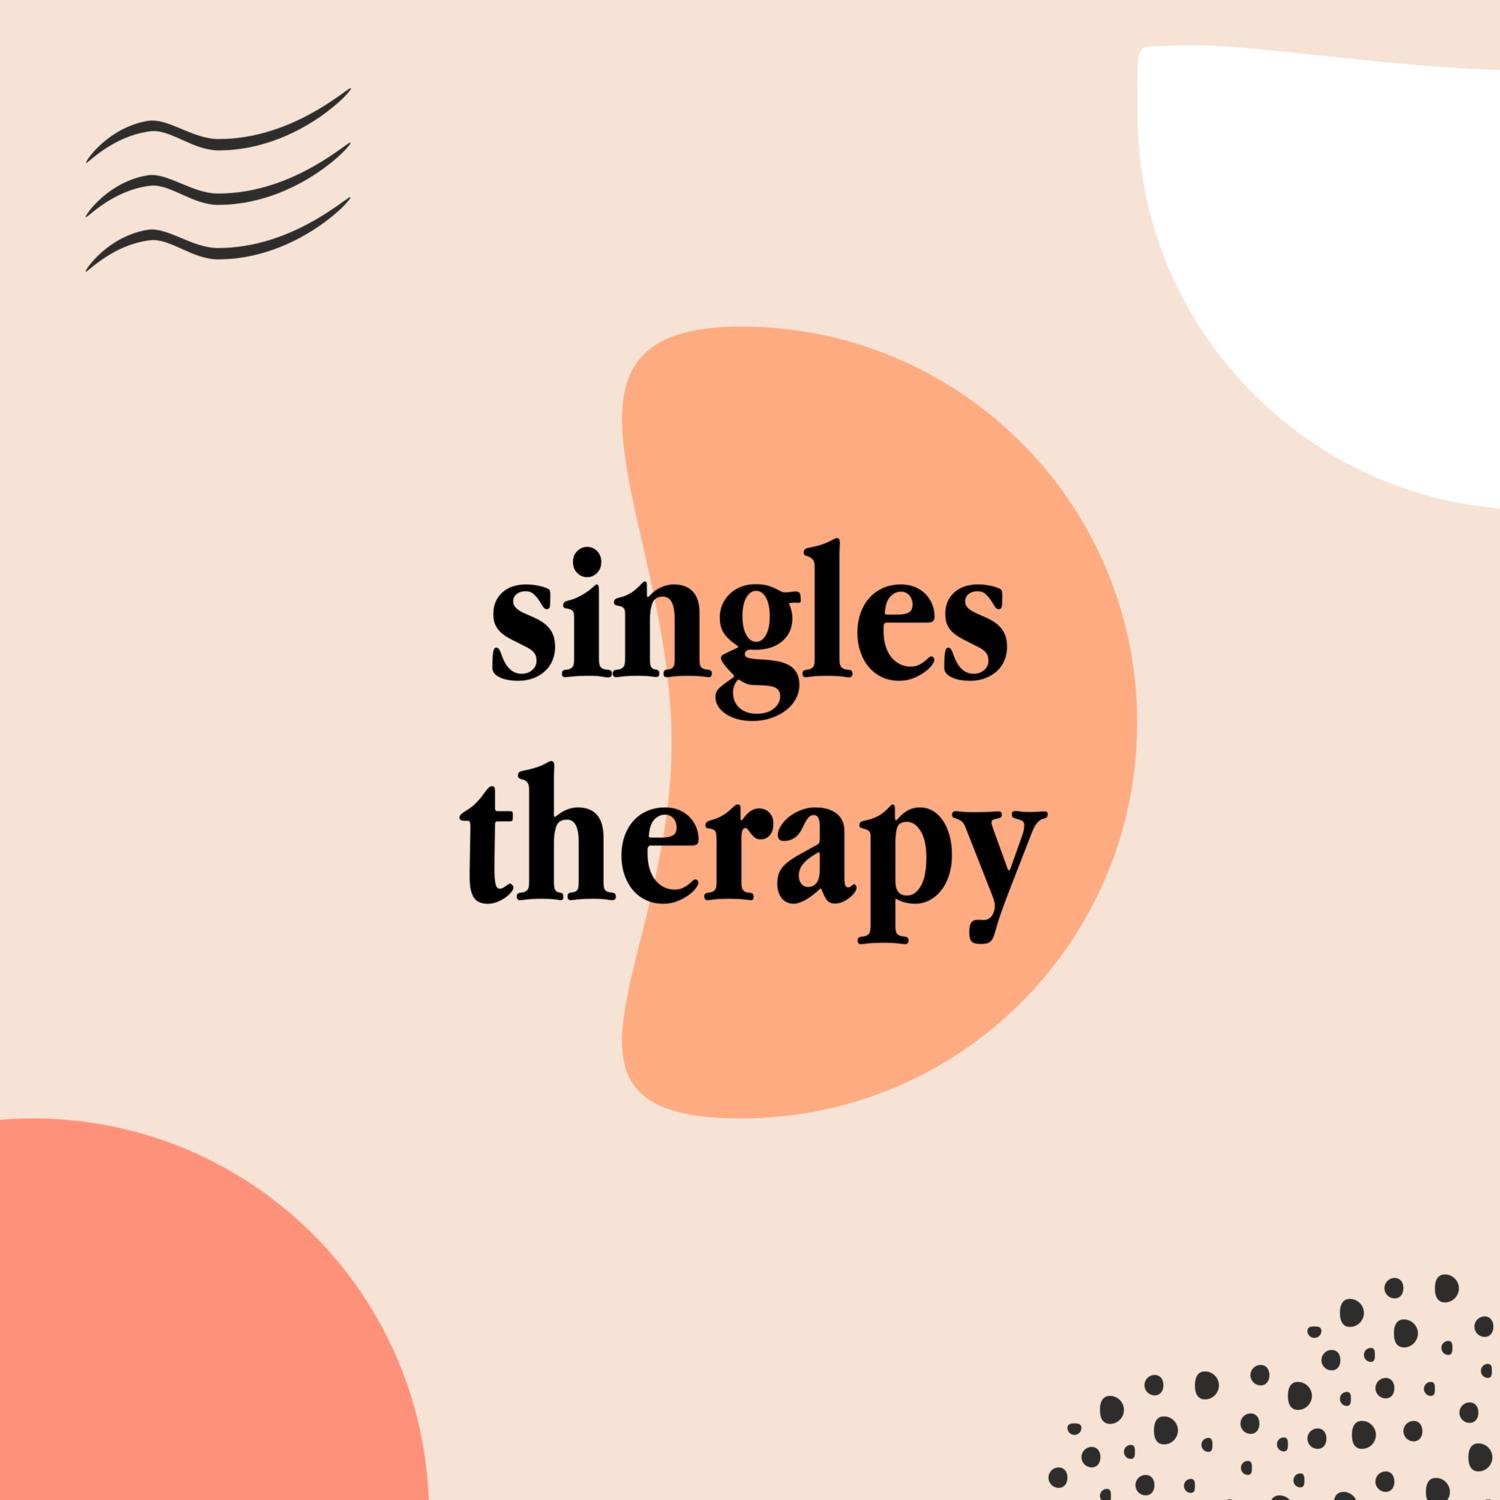 The podcast where we talk about modern dating. And, of course, being single. 🎙 by @michaelwithana. Listen to the first episode now 👇🏼